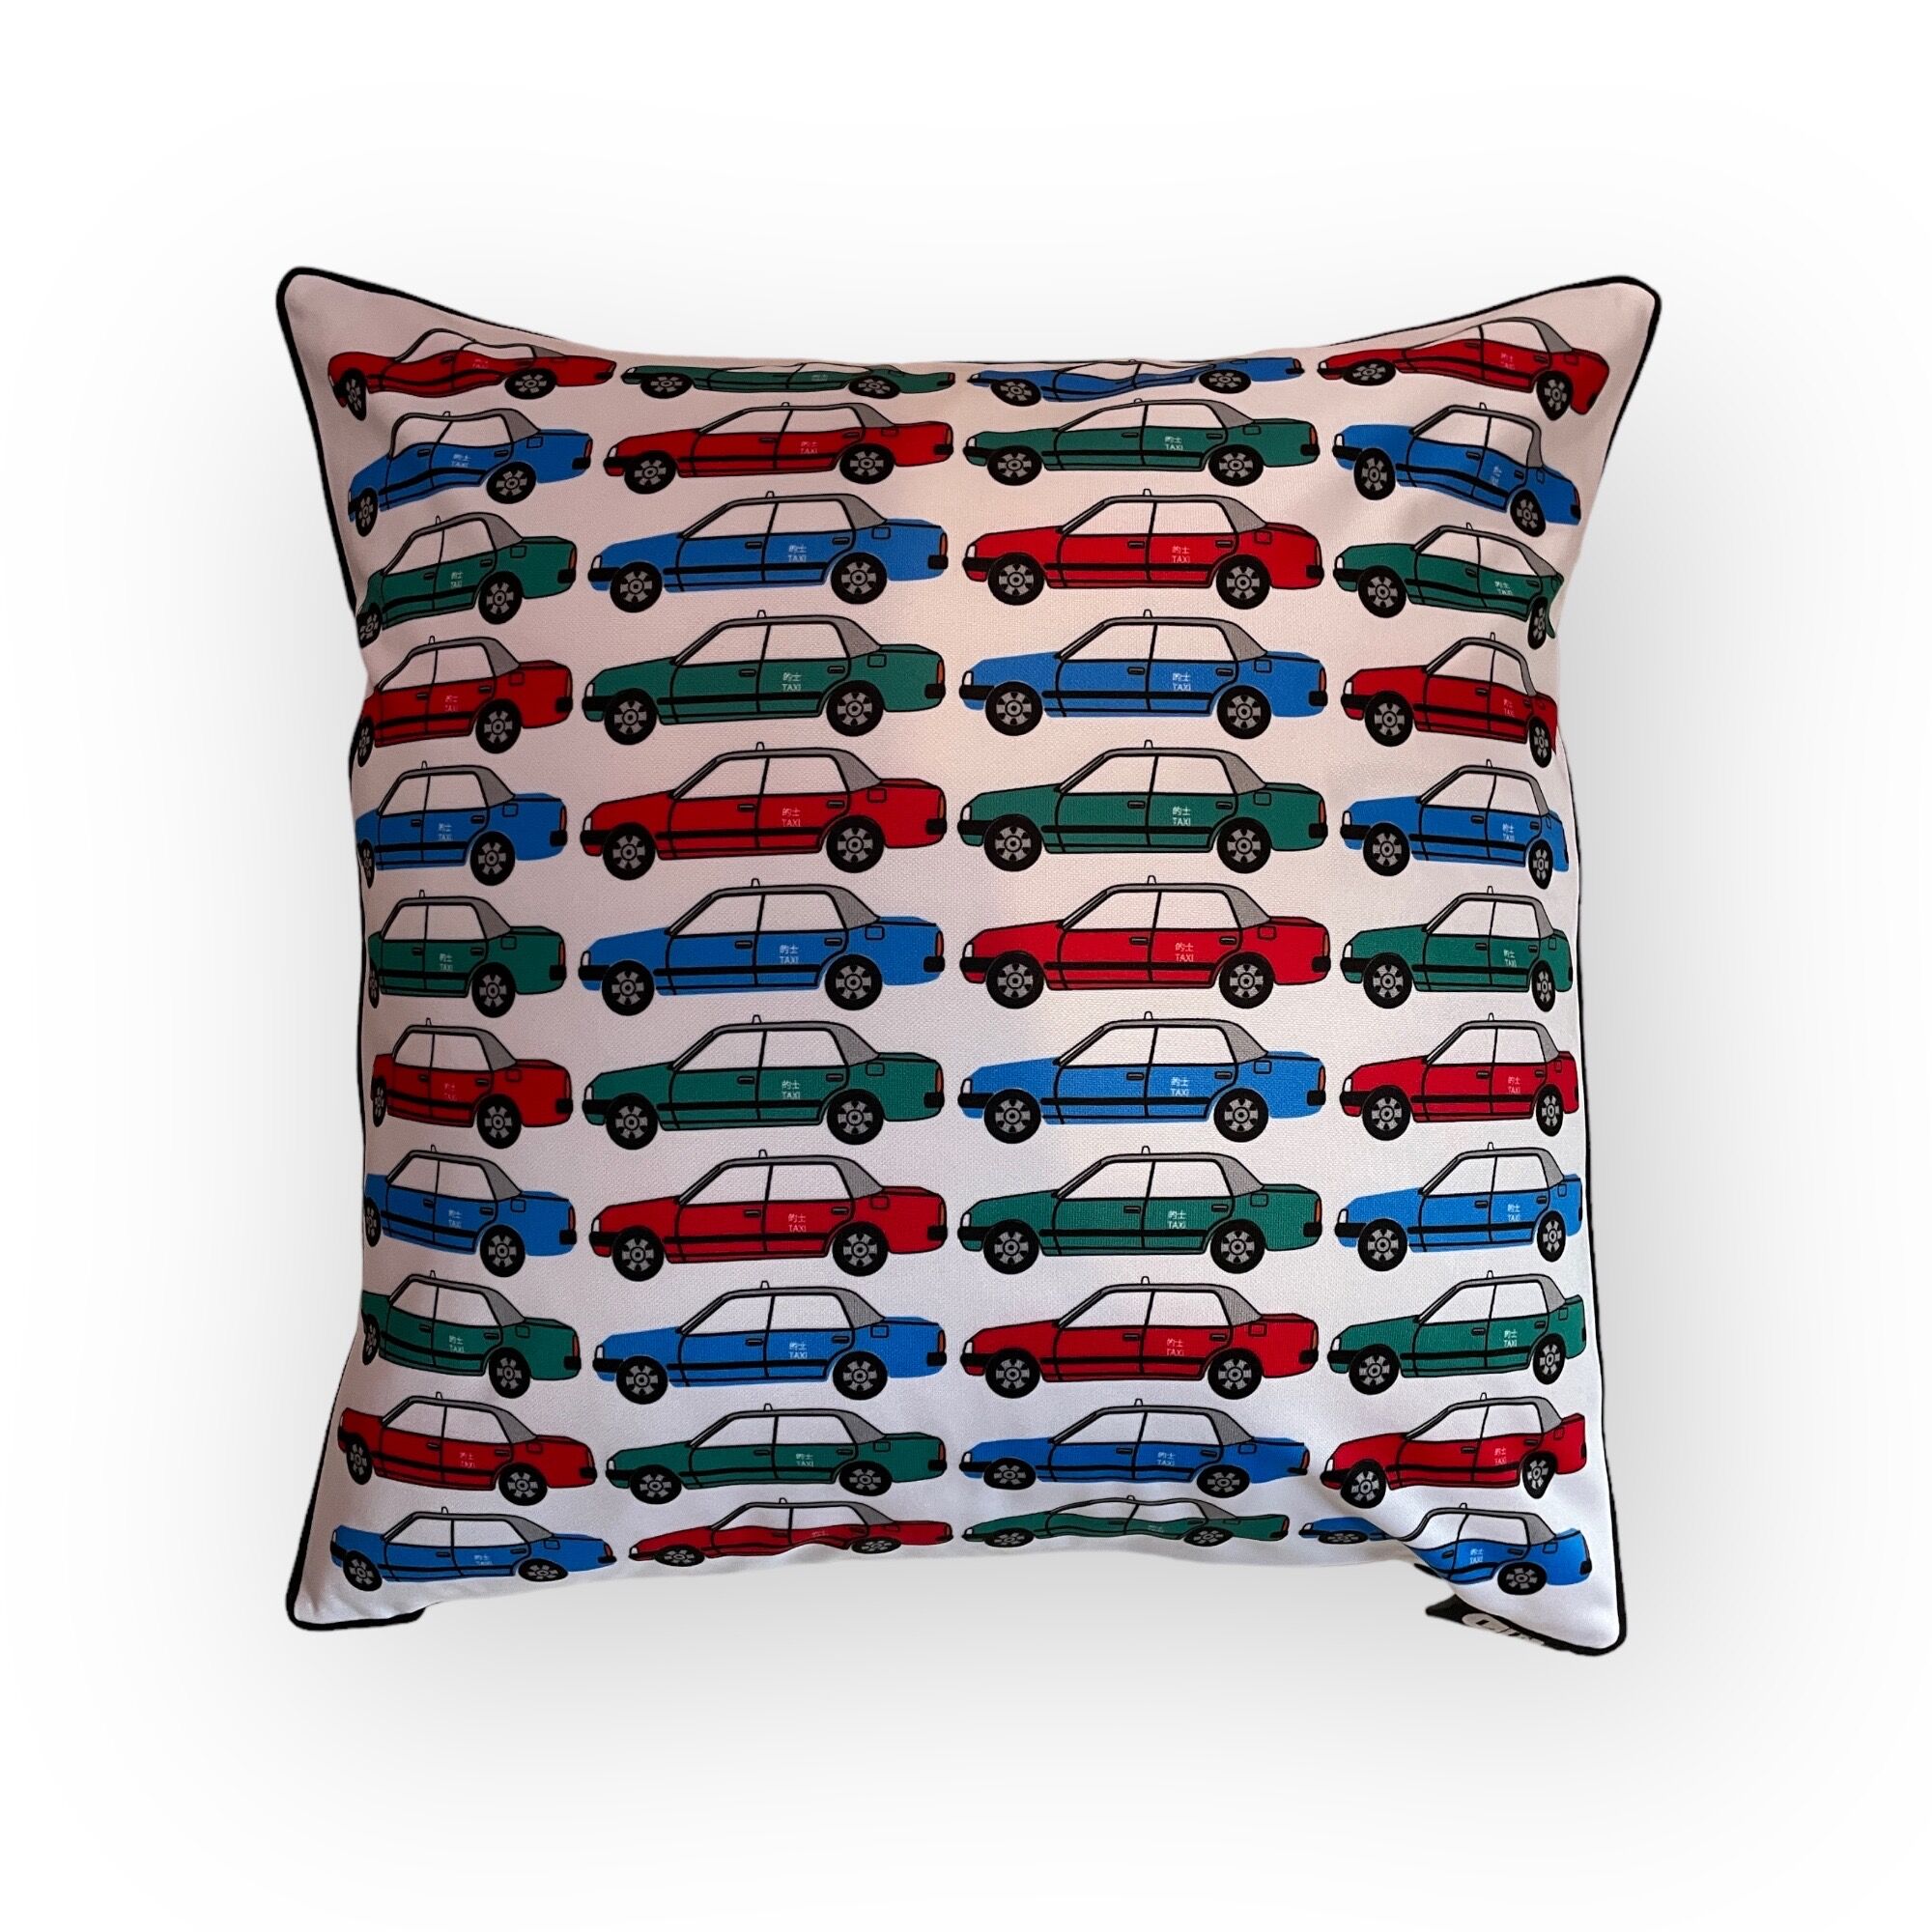 Taxis Cushion Cover by Liz Fry Design